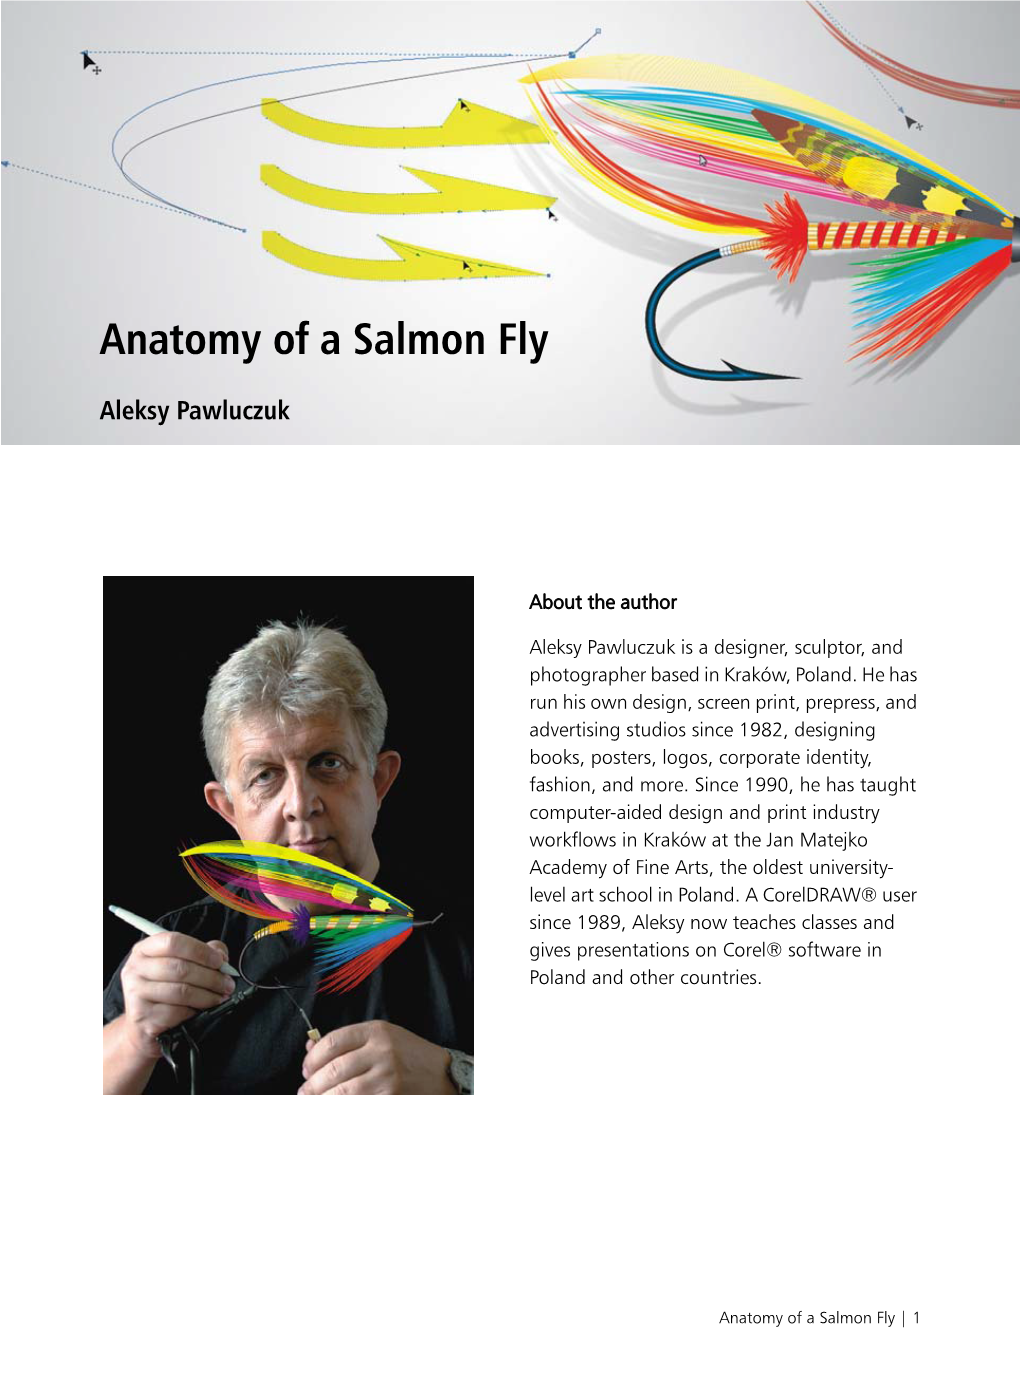 Anatomy of a Salmon Fly